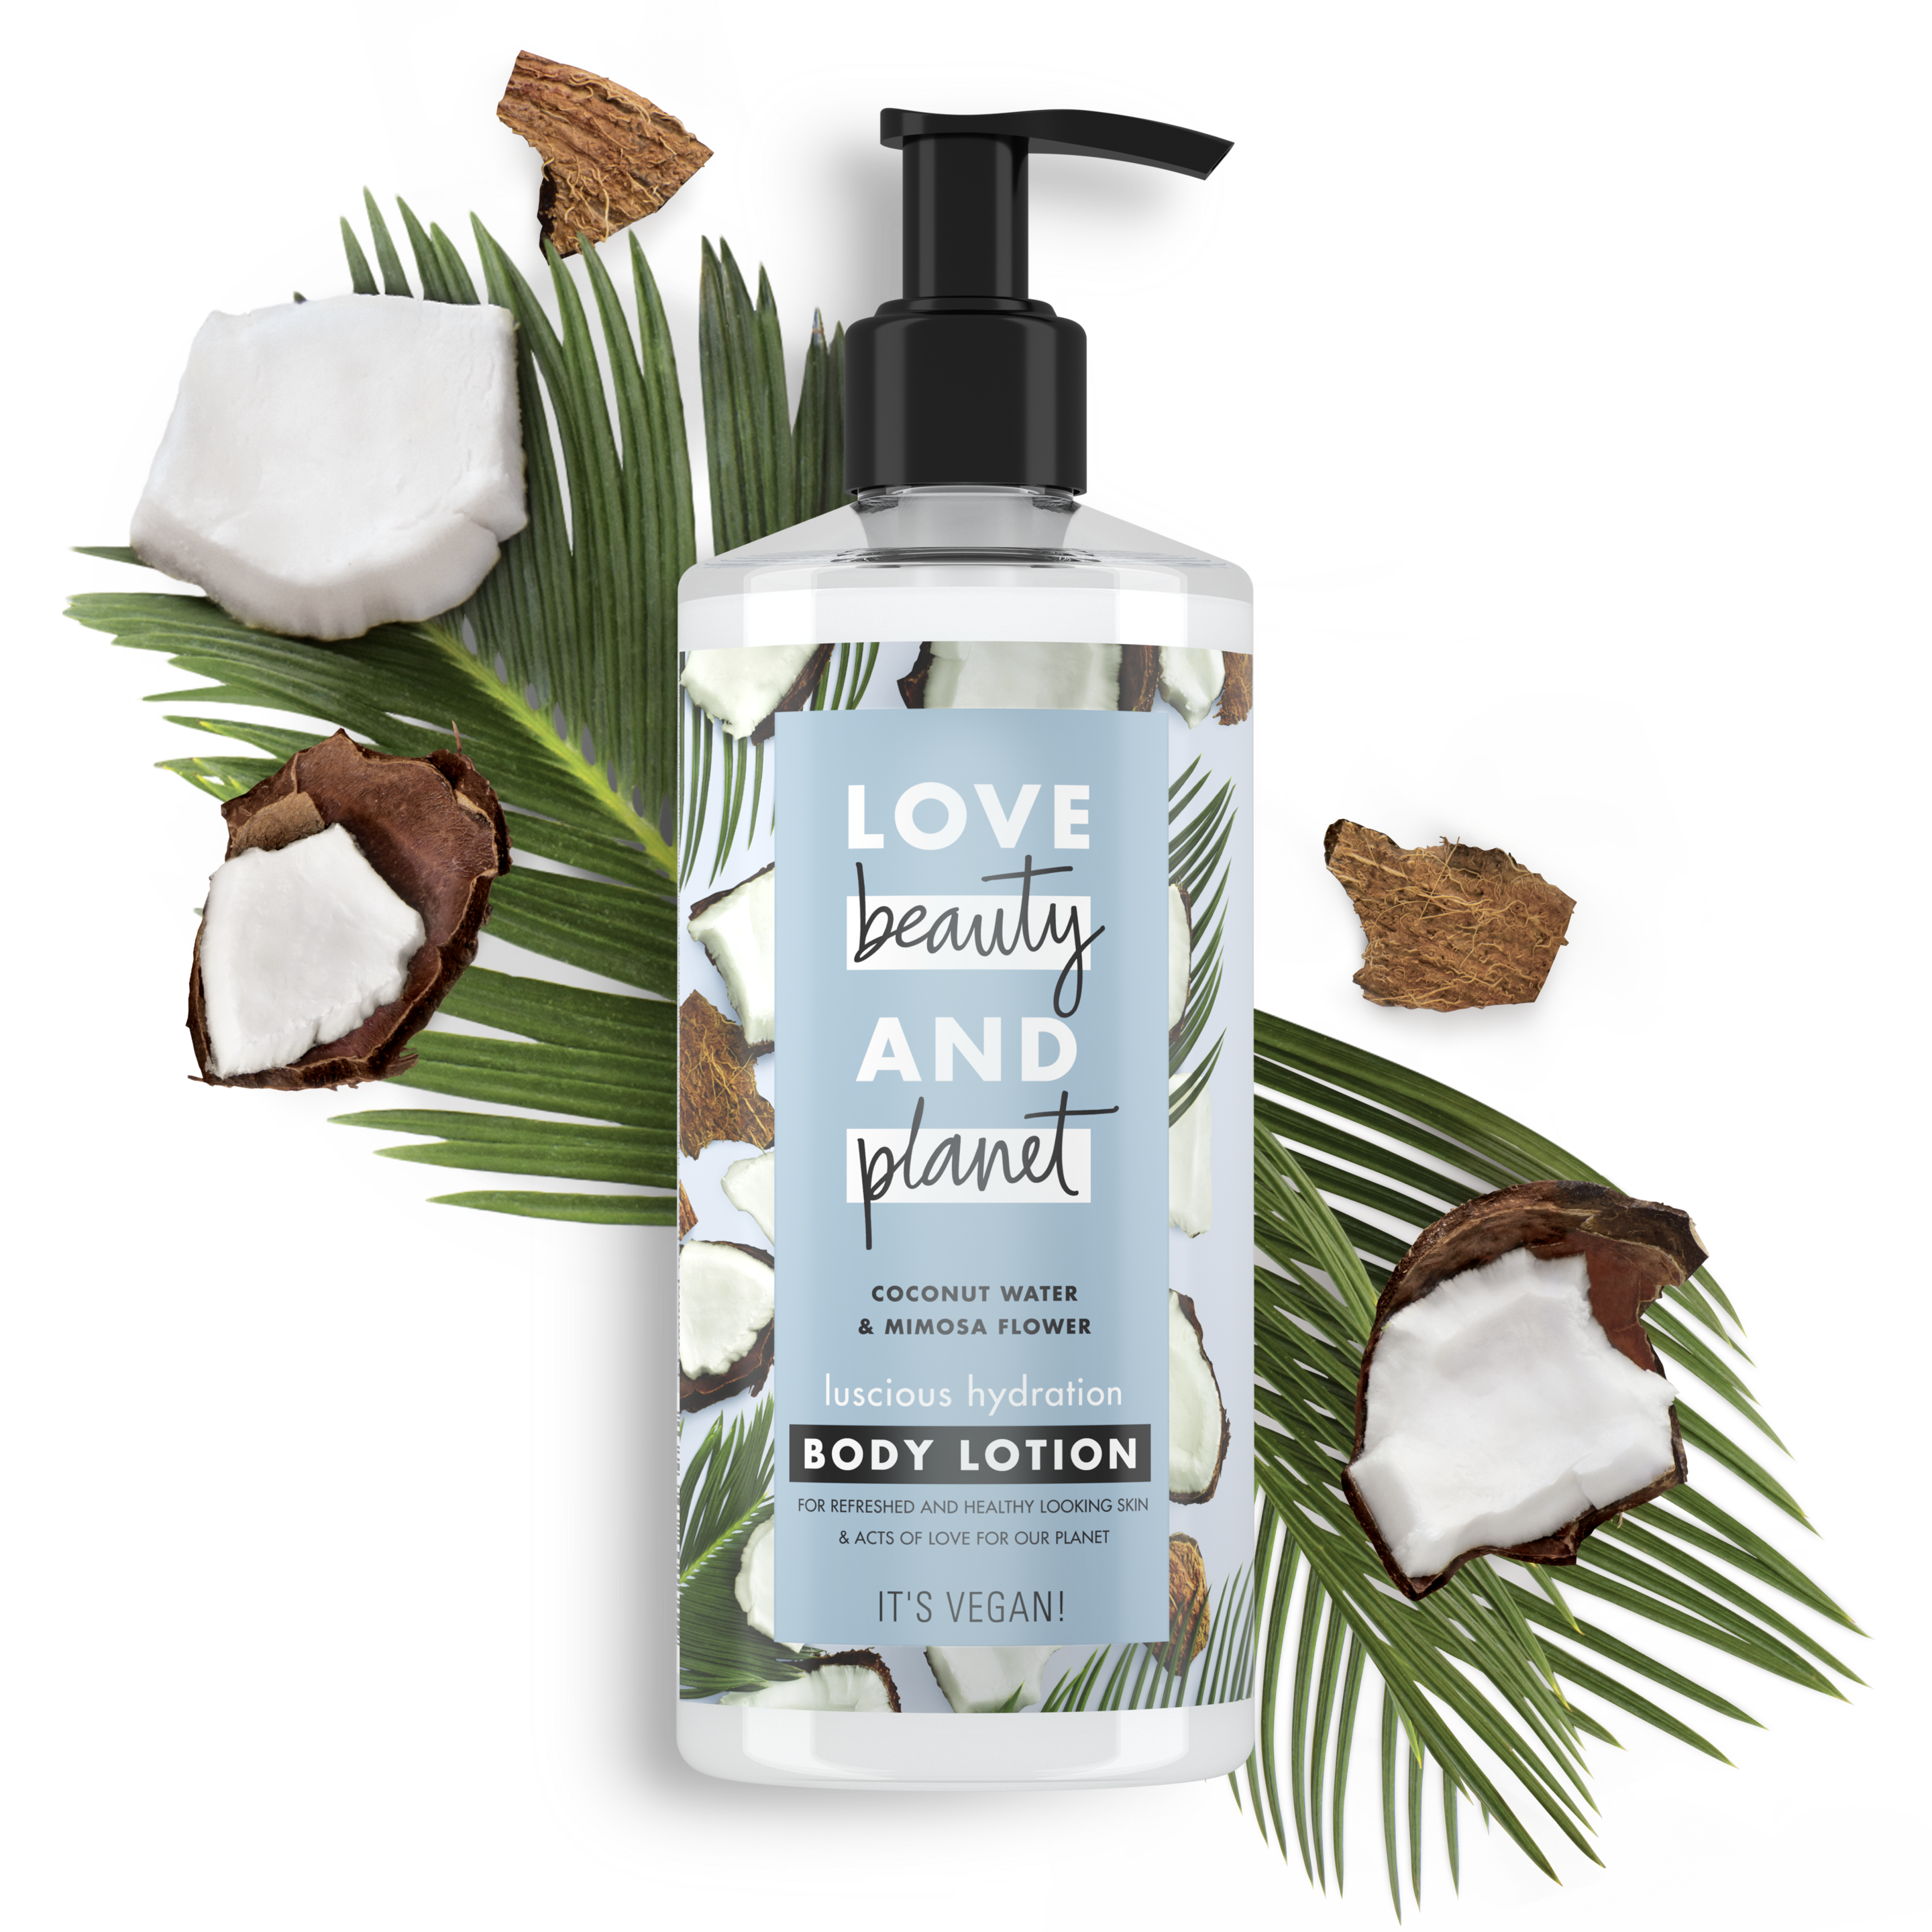 Coconut Water & Mimosa Flower Body Lotion Text